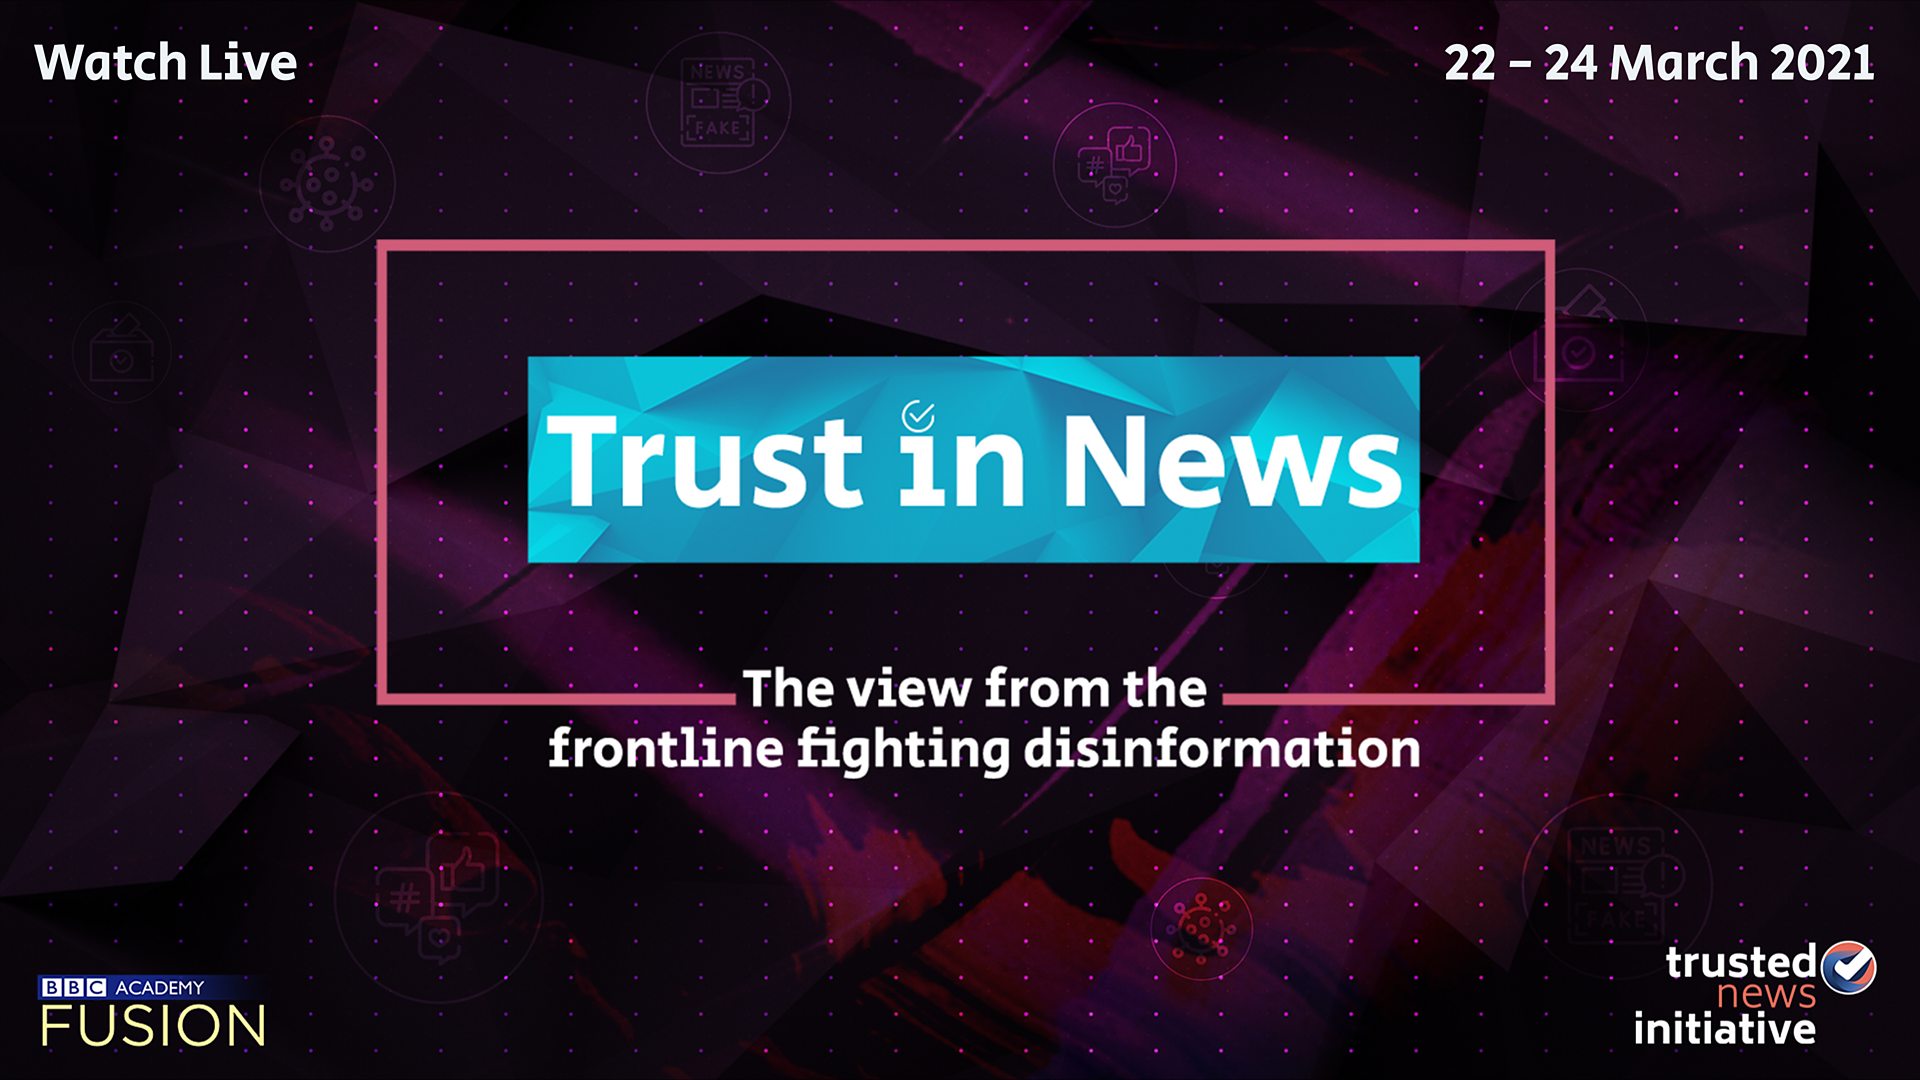 Trust in News conference: The view from the frontline fighting disinformation